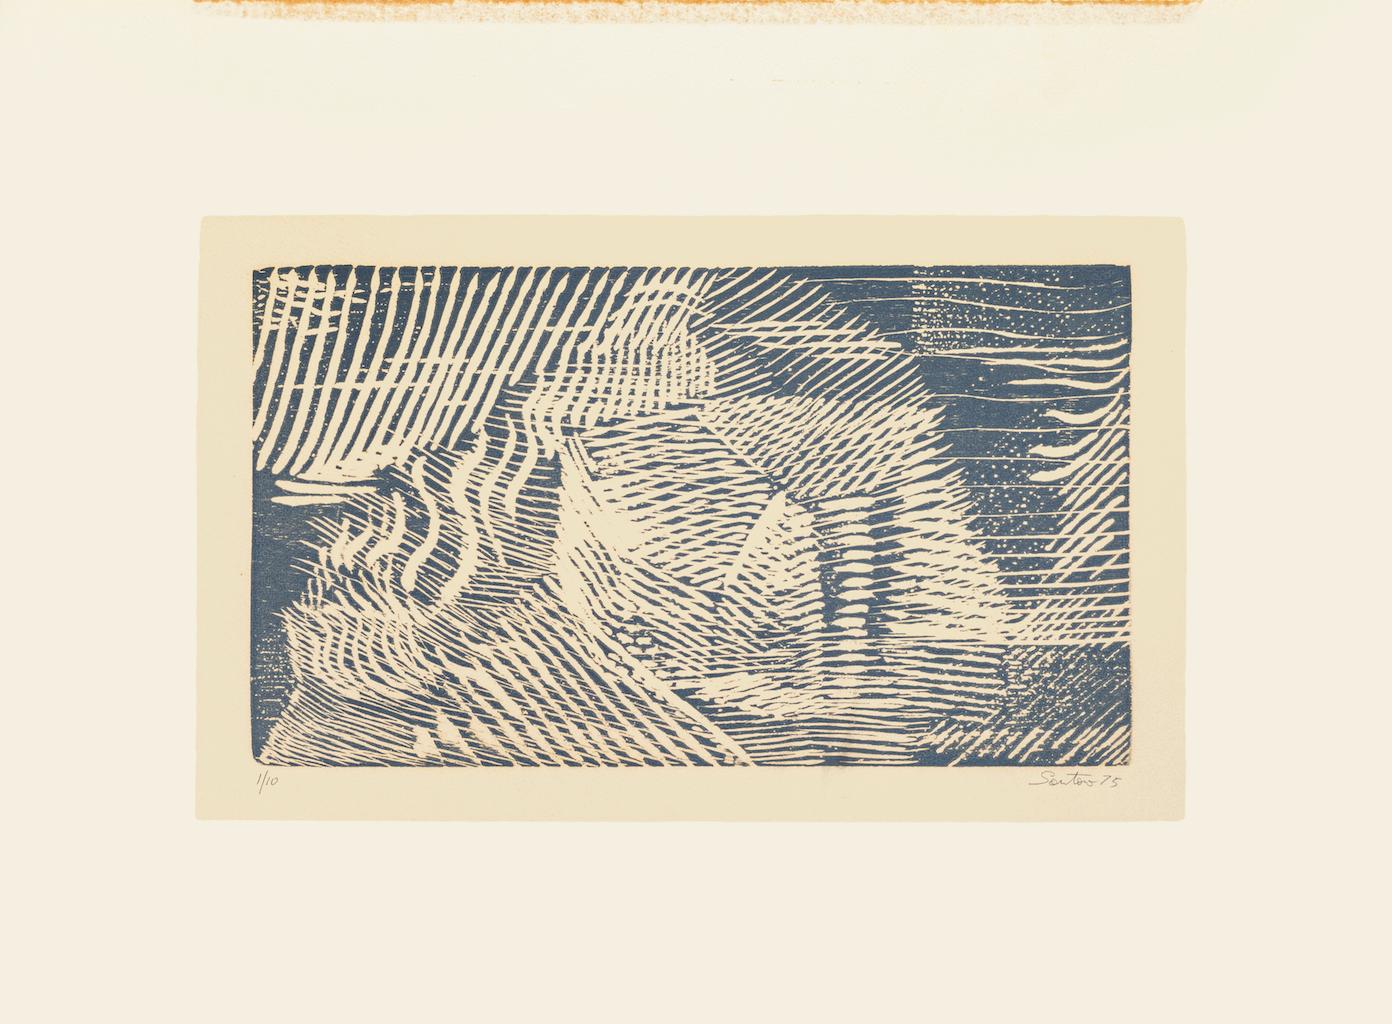 "Abstract Composition" is an original lithograph on paper, realized by Nini Santoro in 1975.
Hand-signed on the lower right in pencil.
Numbered, on the lower left, from a rare edition of 1/10 prints
The state of preservation of the artwork is